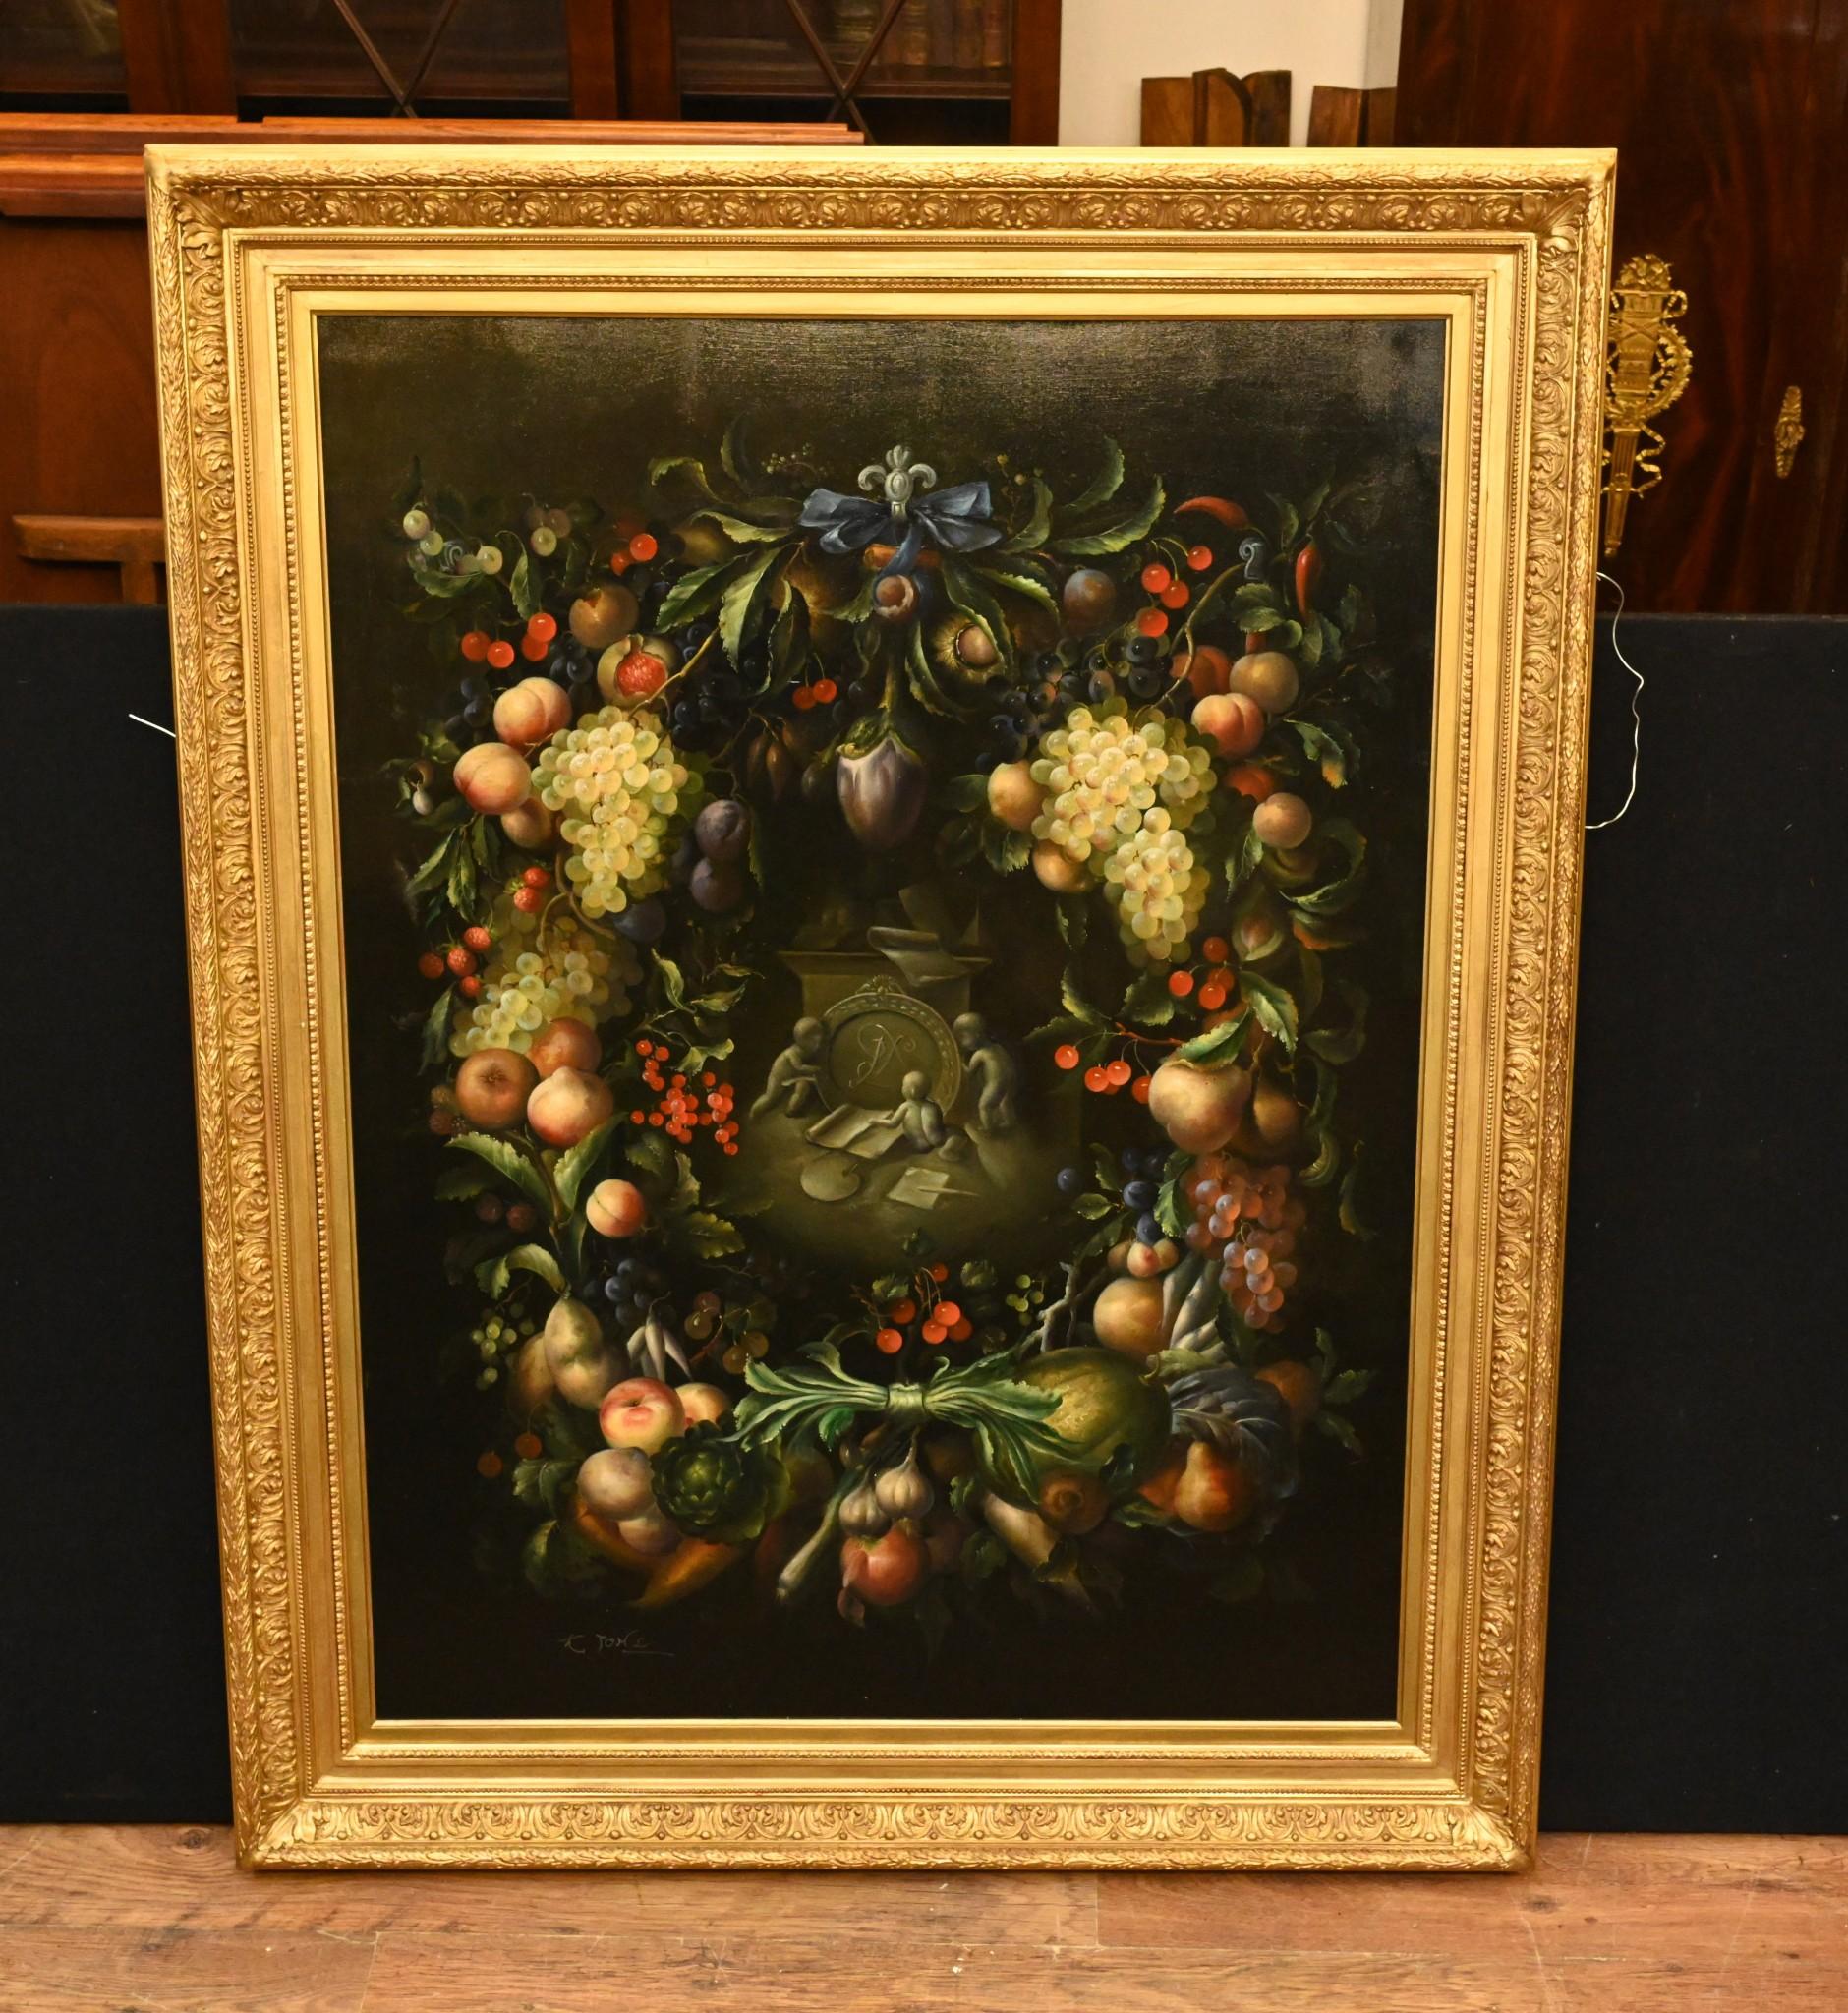 Very bright and vivid oil painting of a classic still life scene in the Victorian manner
Good size at amost five feet tall - 147 CM
The arrangement includes fruit, grapes, flowers and cherubim
Artist has really captured the scene with great